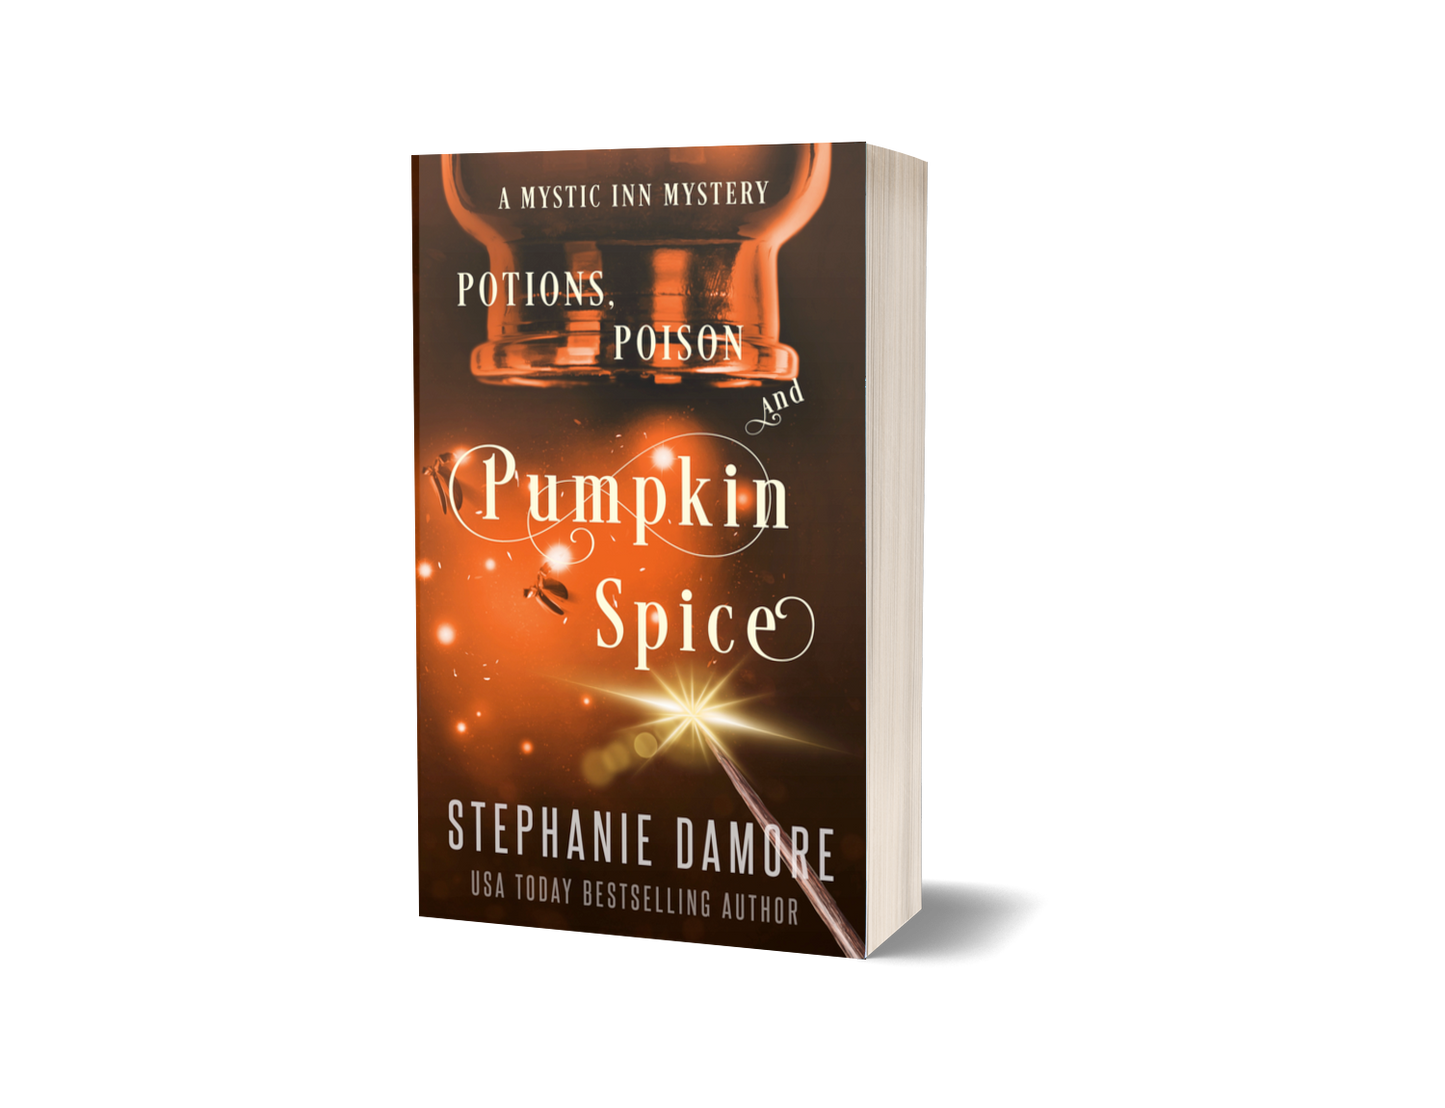 Potions, Poison, and Pumpkin Spice - Paperback (Book 7)